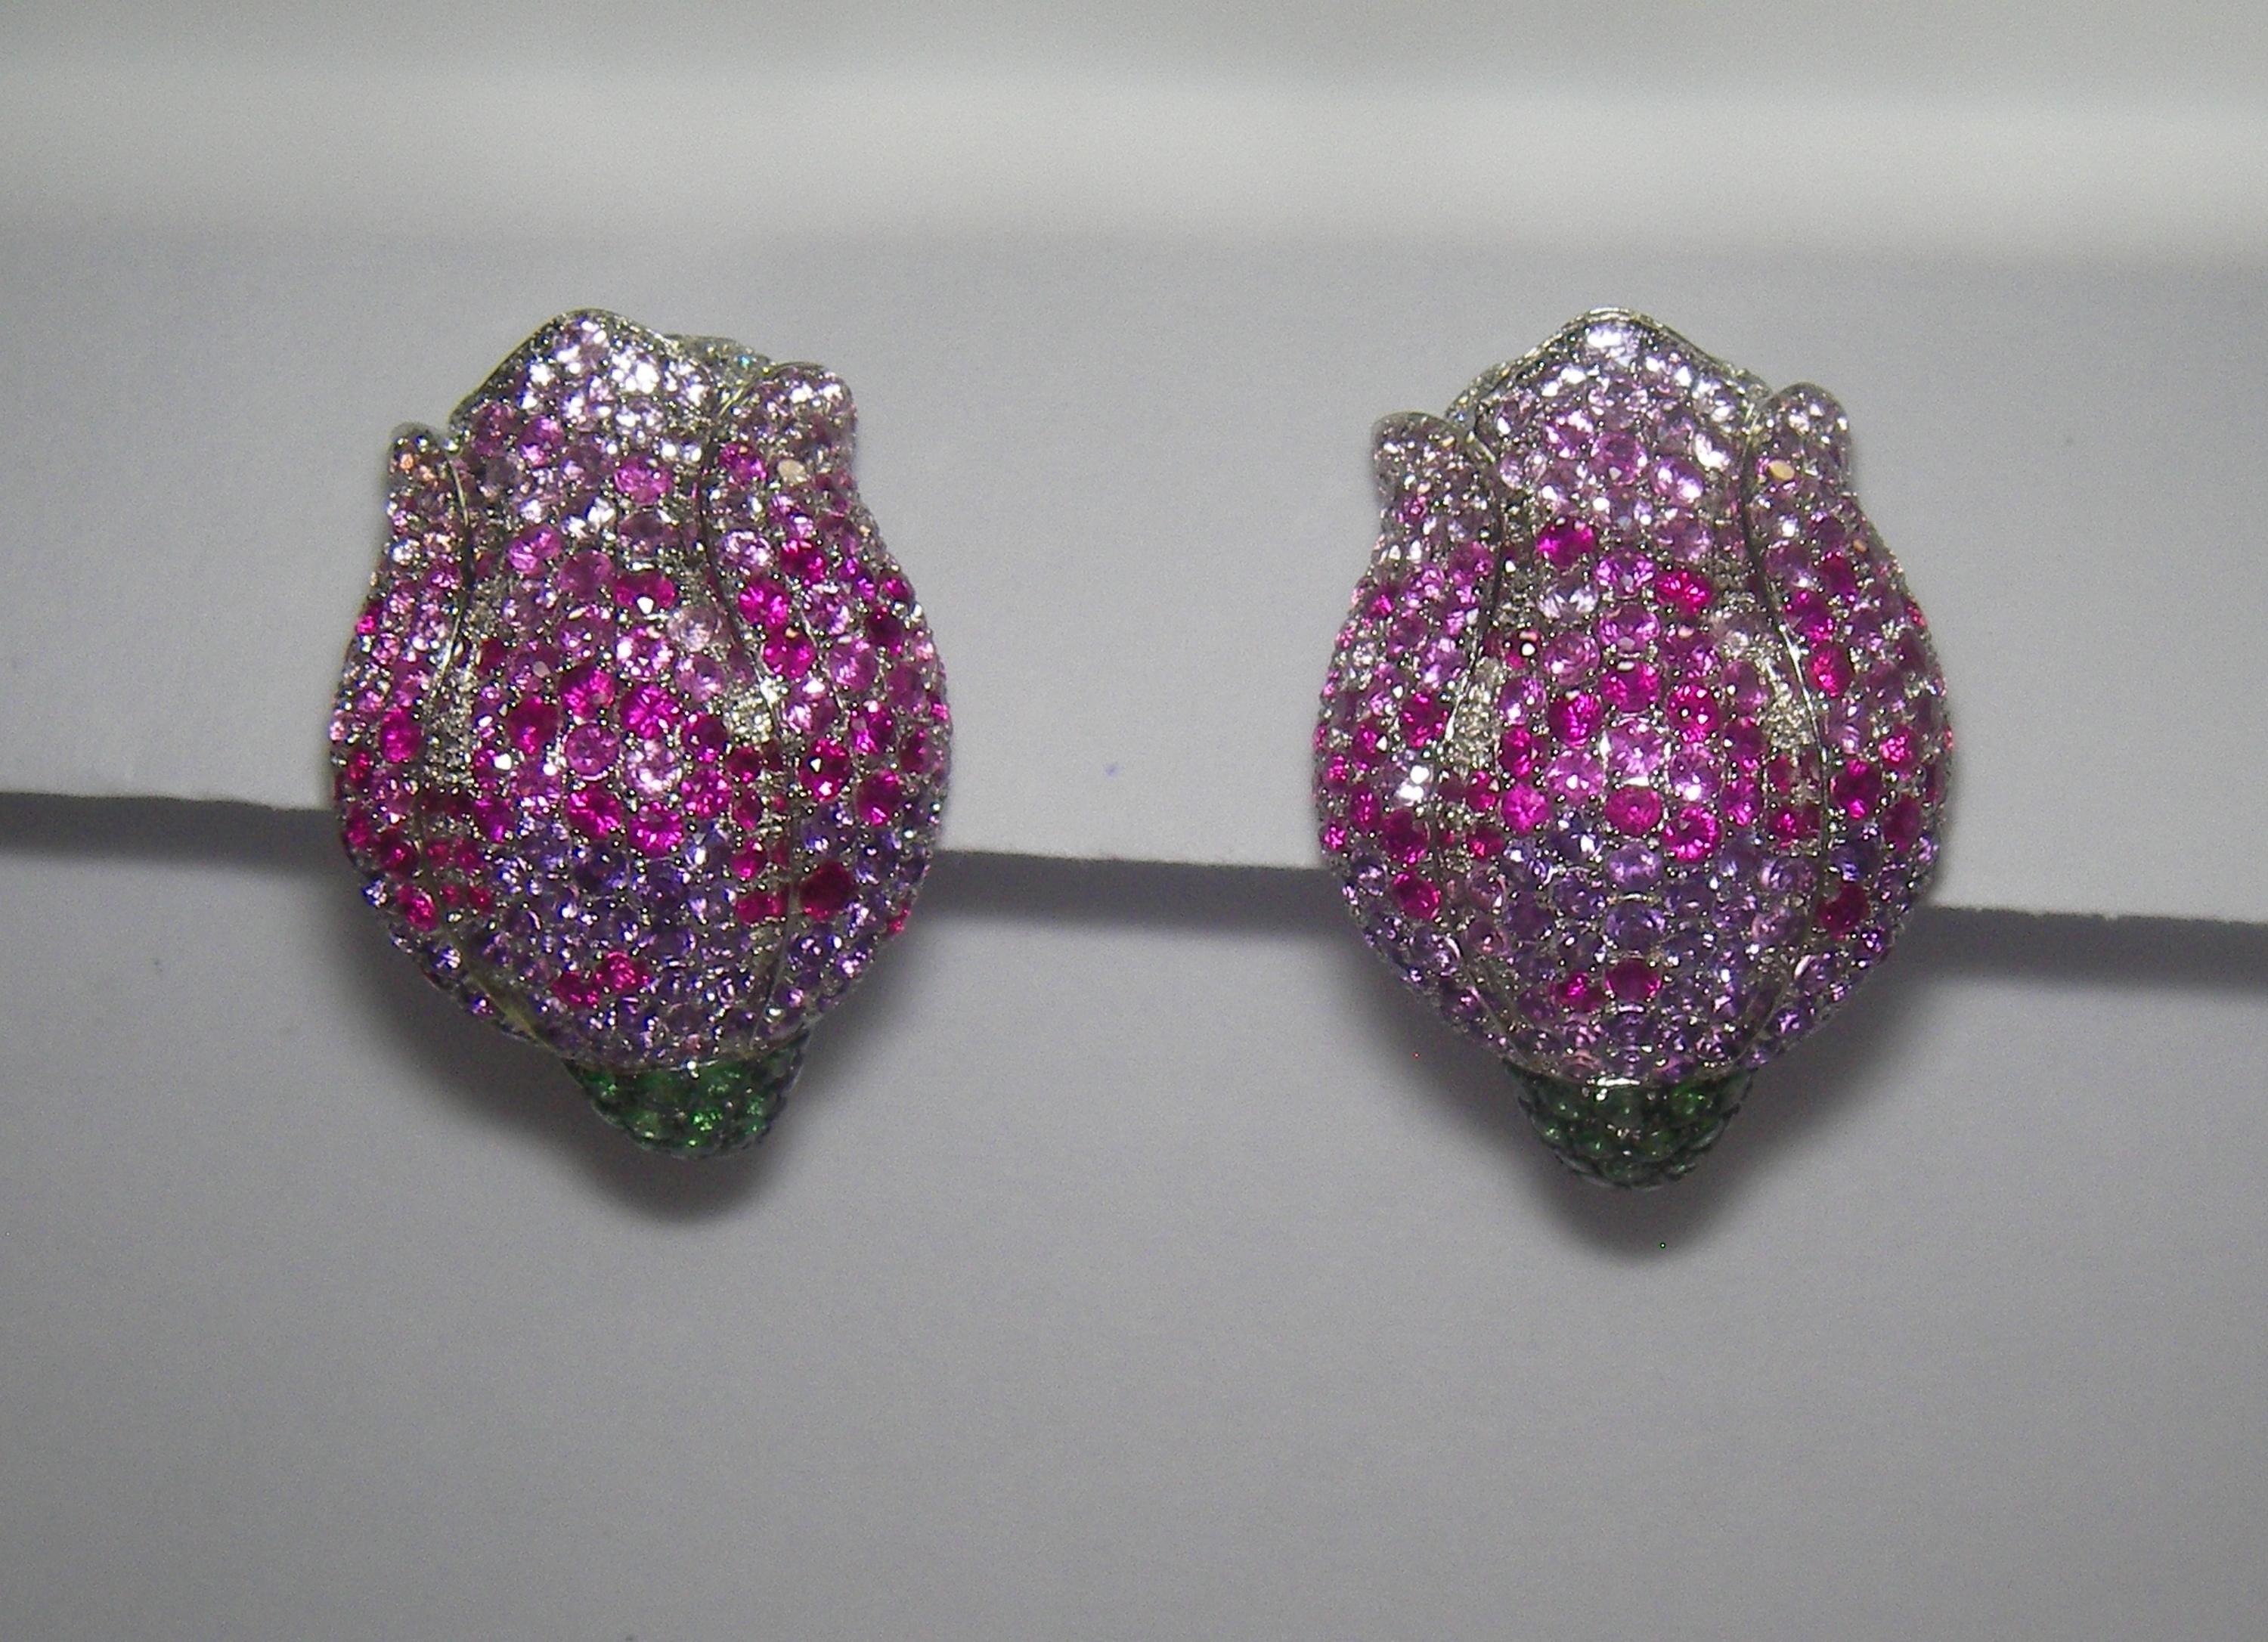 18 Karat White Gold Tilips  Stud Earrings

36 Diamonds 0.34 Carat
283  Pink Sapphire 3,20 Carat
11 Amethyst 1,02 Carat
46 Tsavorite 0,58 Carat





Founded in 1974, Gianni Lazzaro is a family-owned jewelery company based out of Düsseldorf,